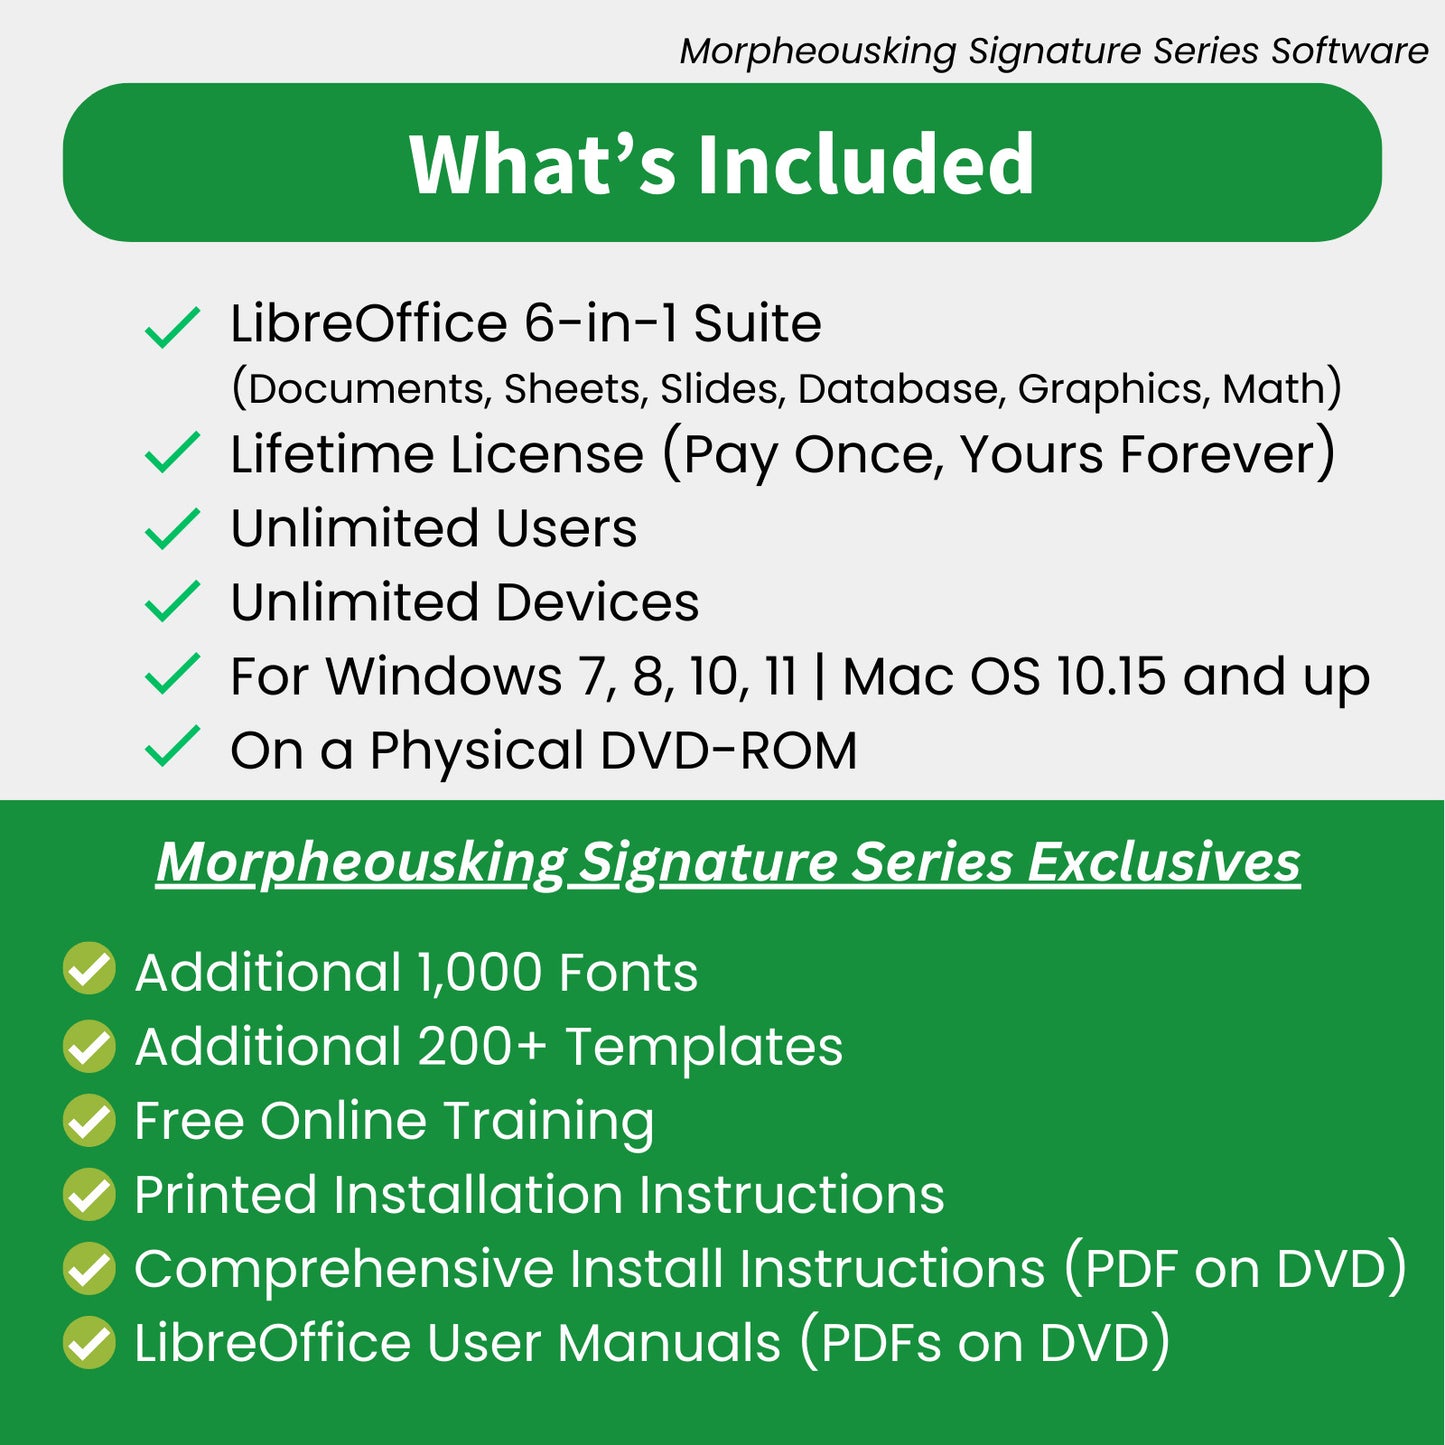 Libre Office Software Suite for Windows Word Processing Home Student Business